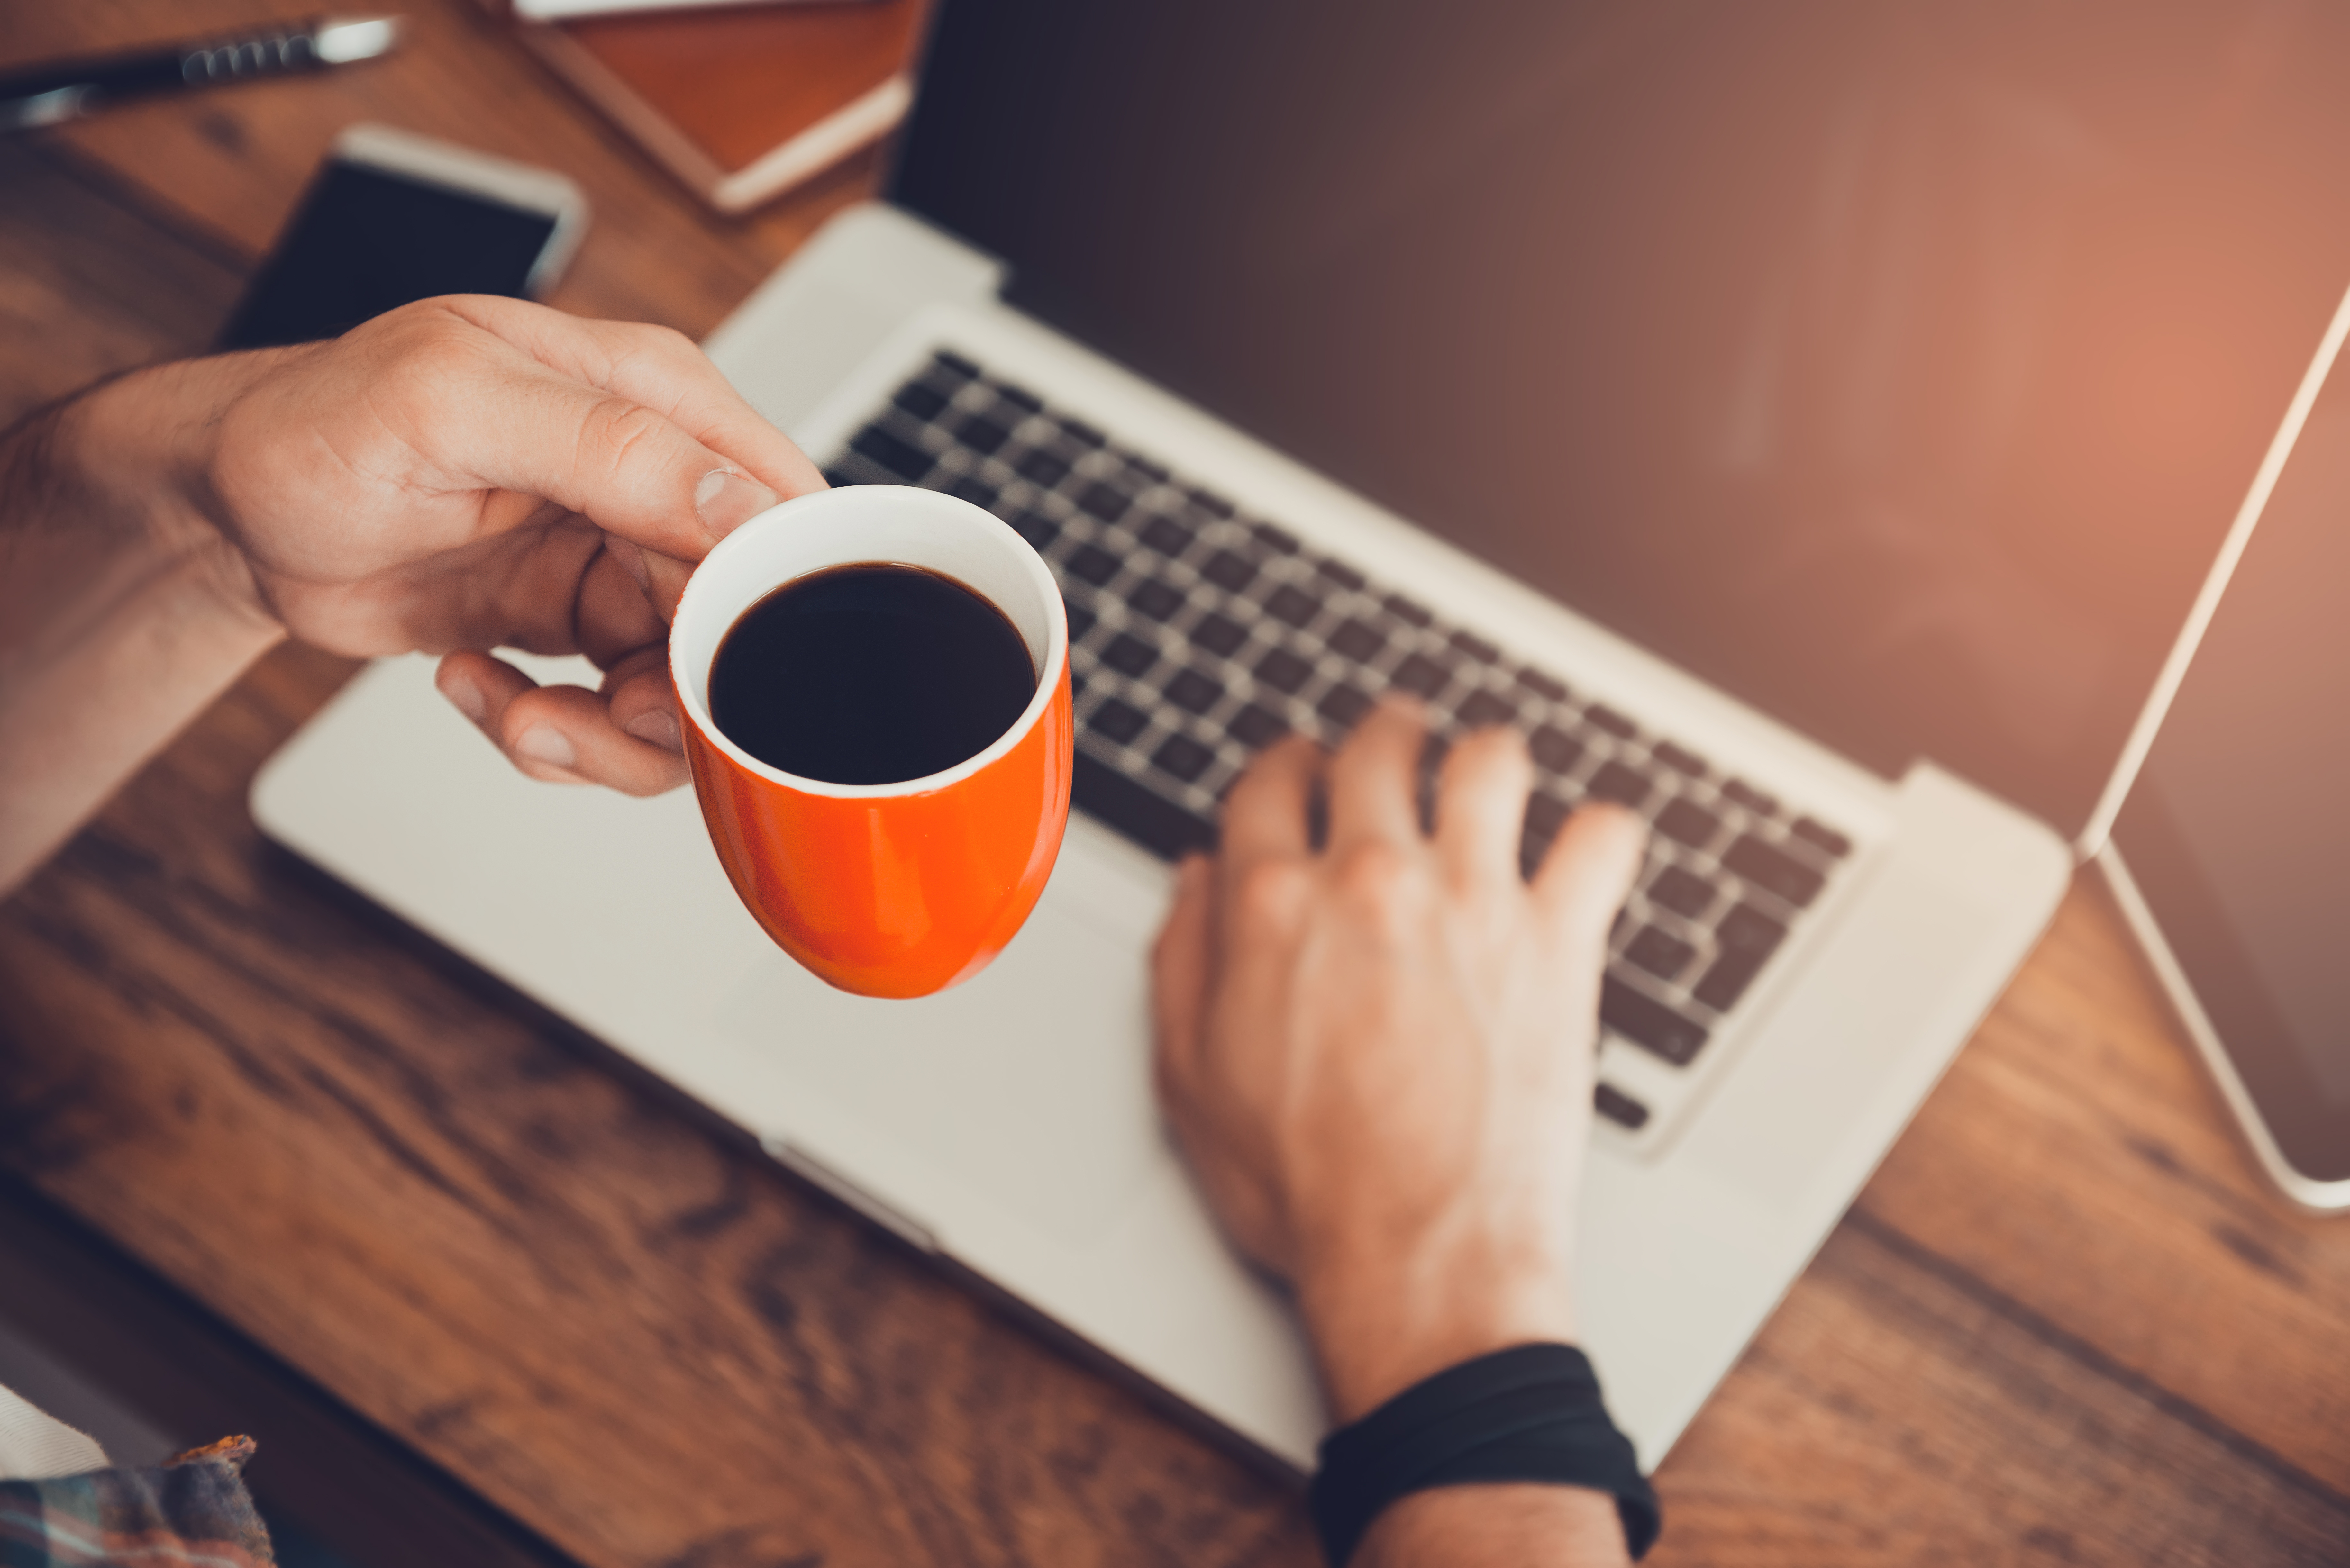 Man working on laptop and holding cup of coffee